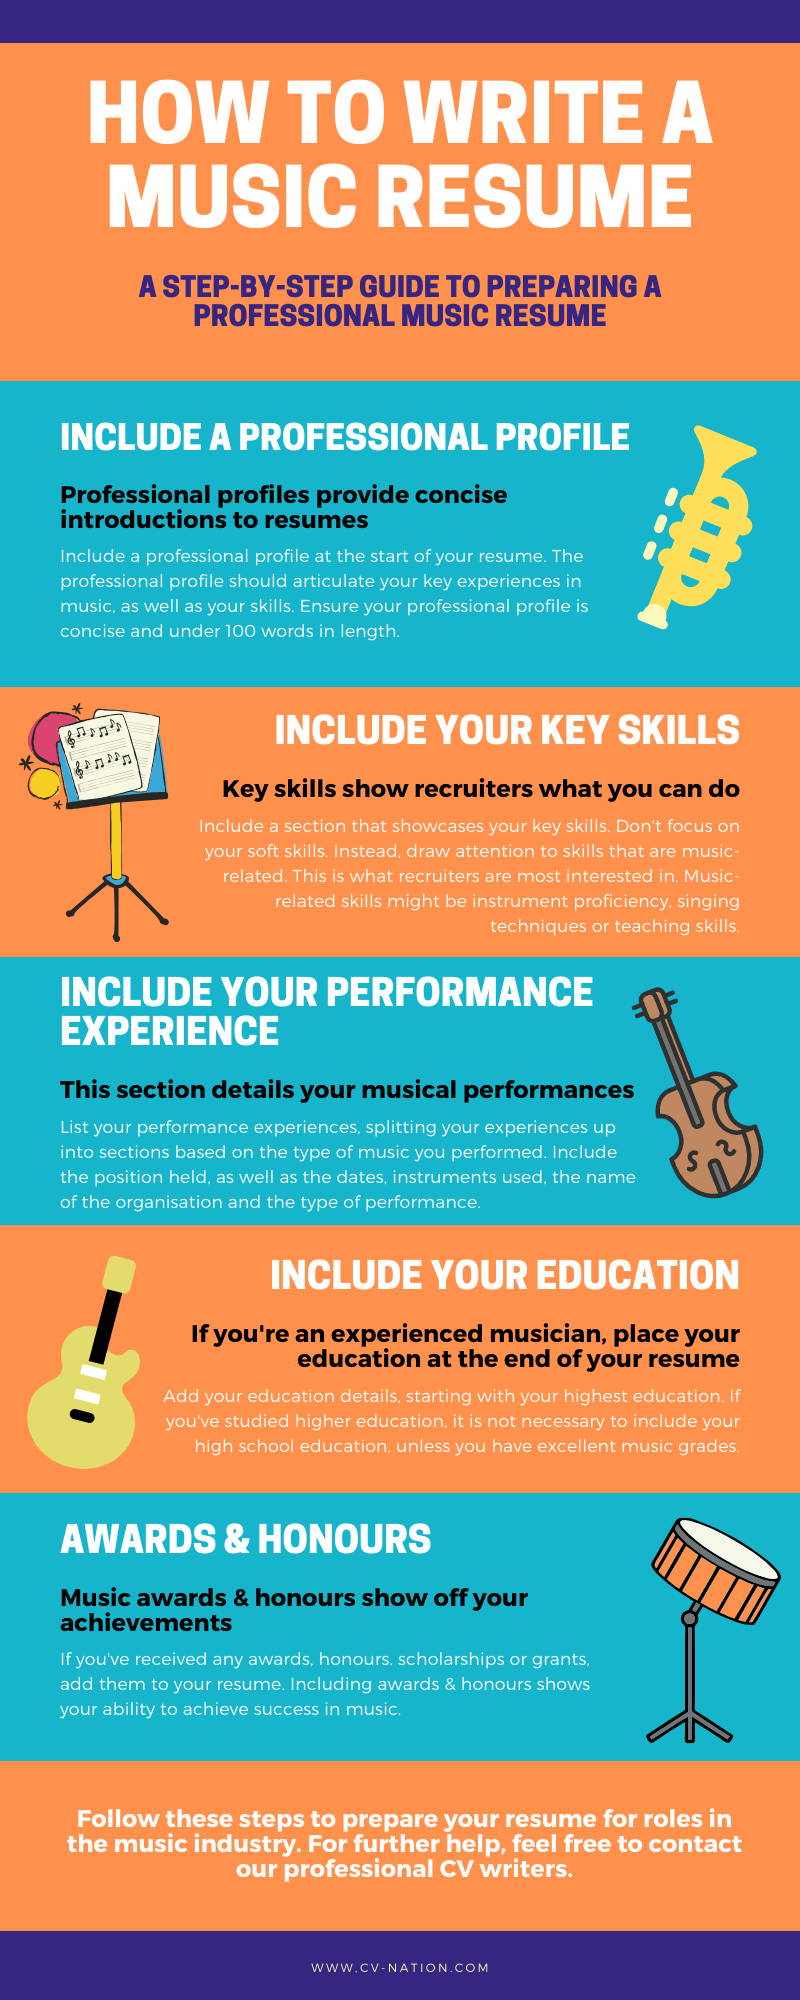 How to Write a Music Resume